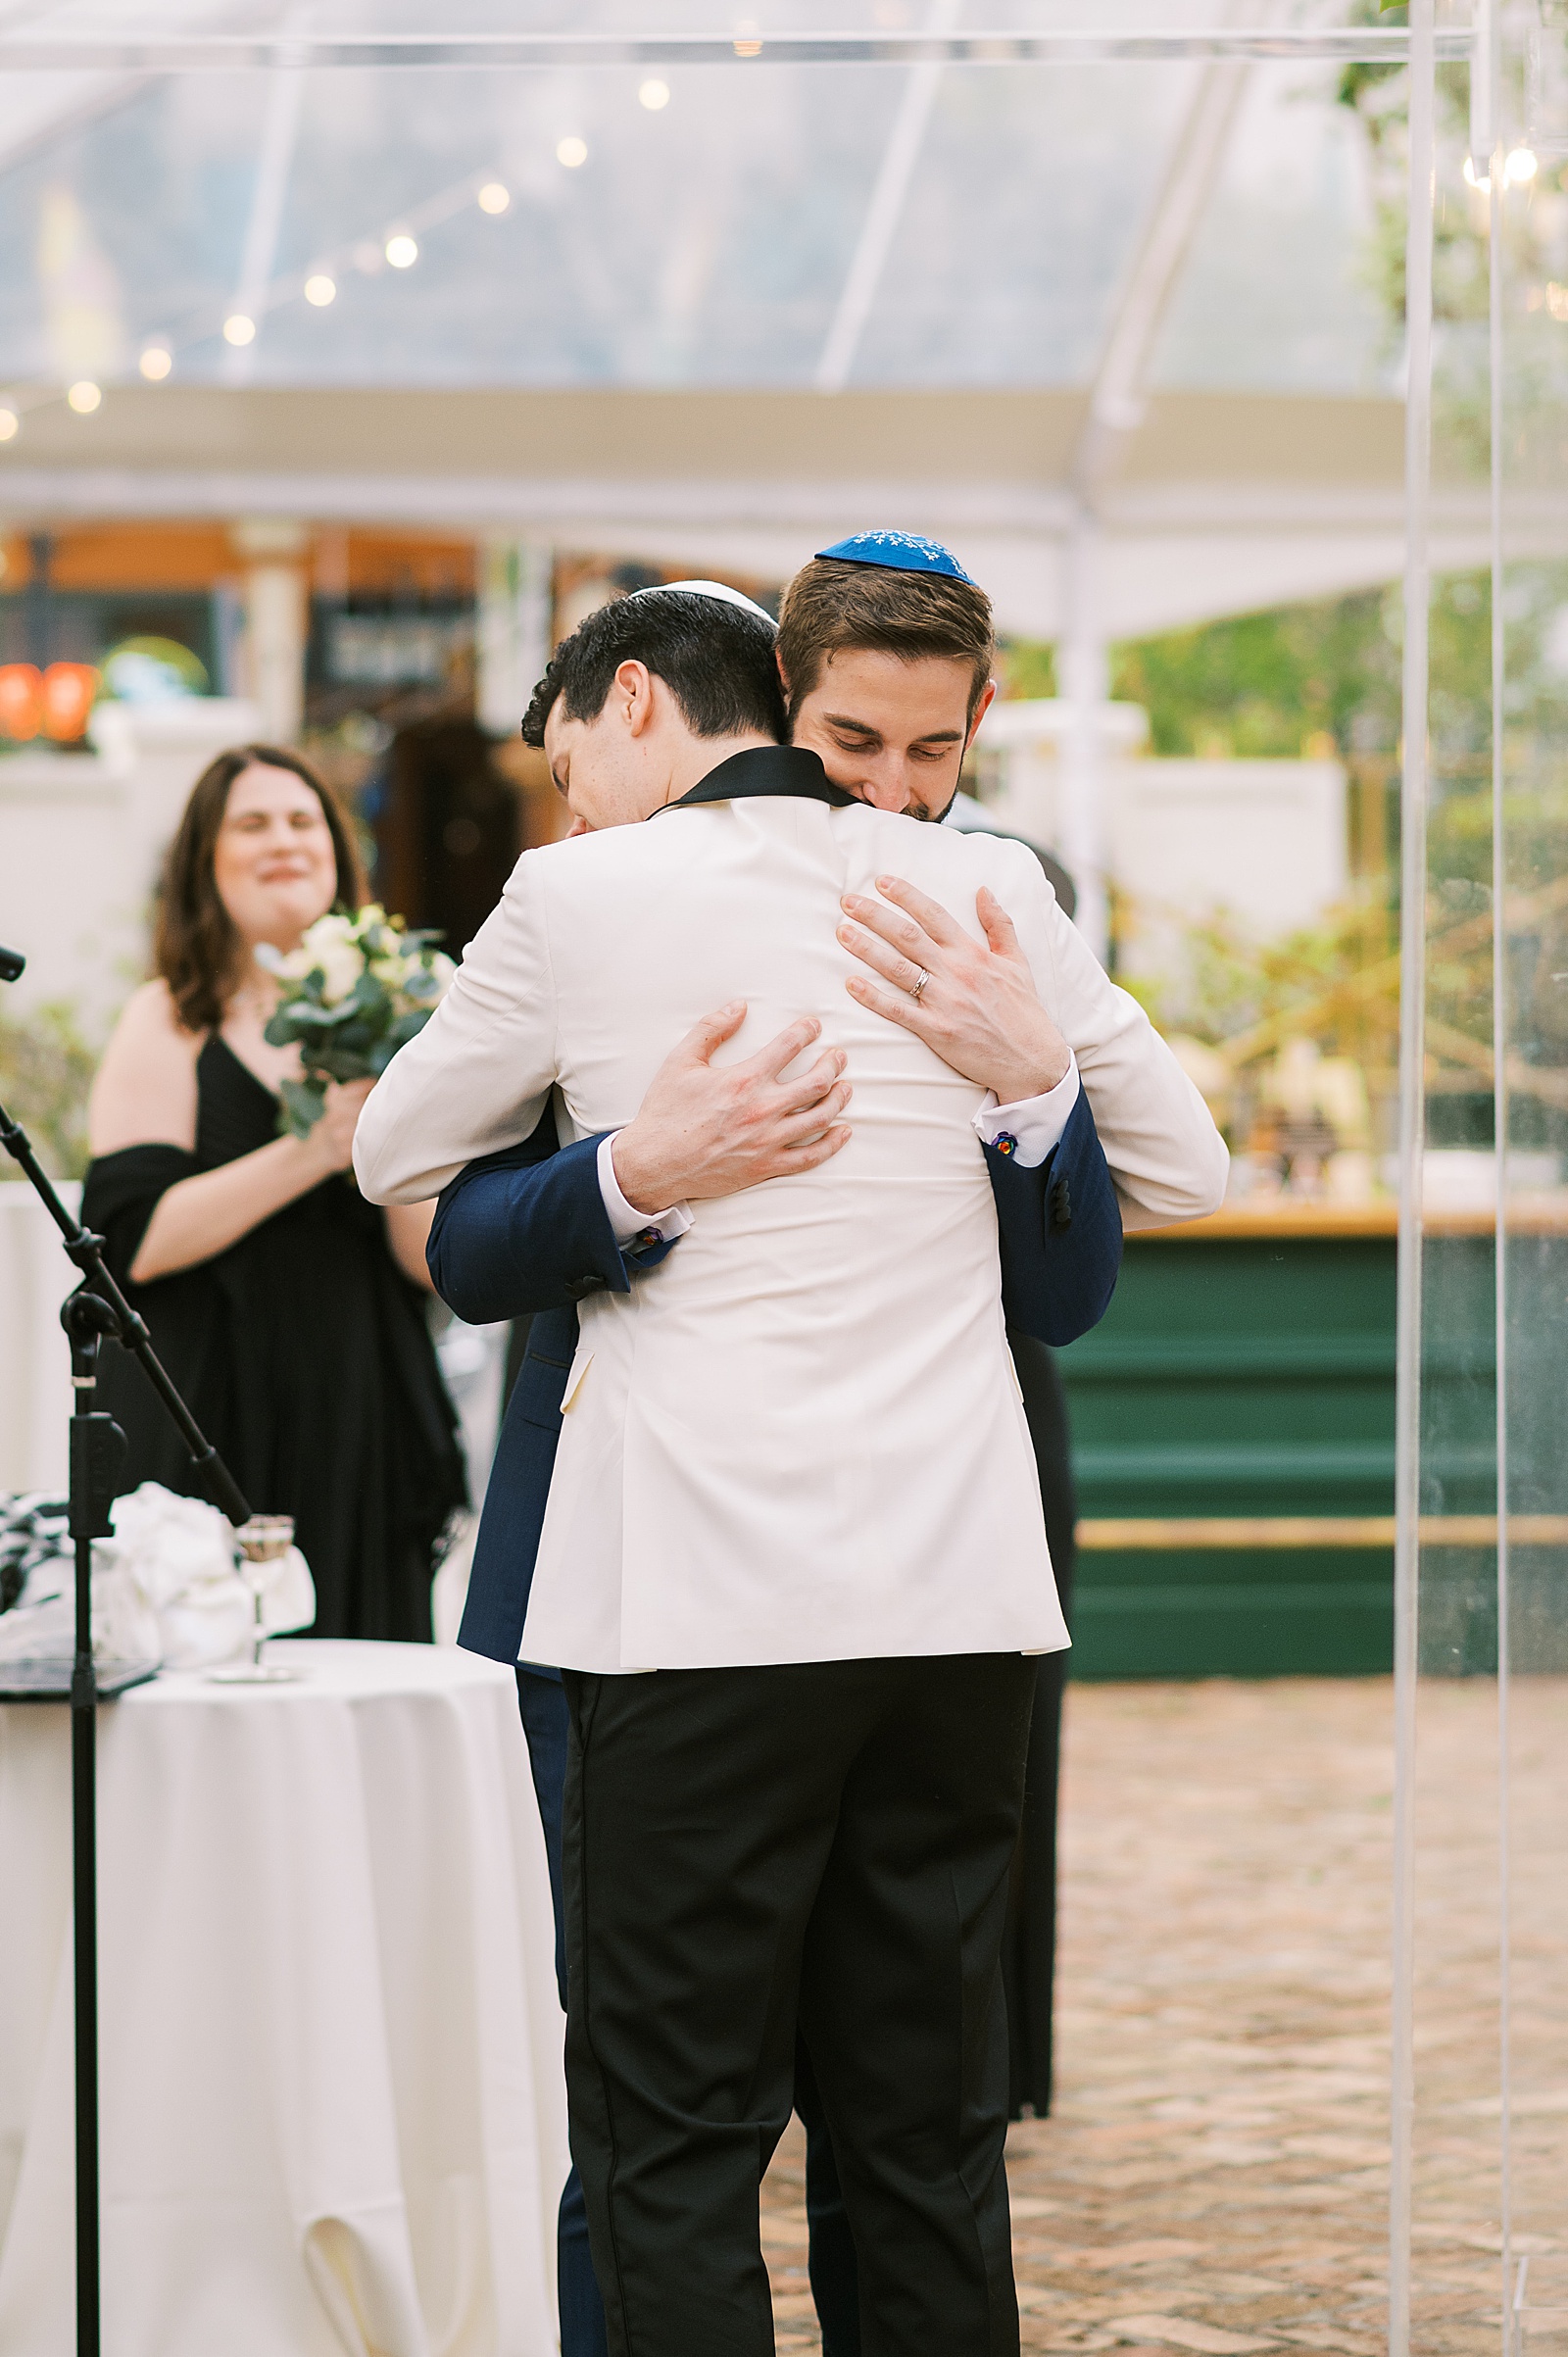 Two grooms embrace under a clear wedding tent in a candid wedding portrait on film photography.